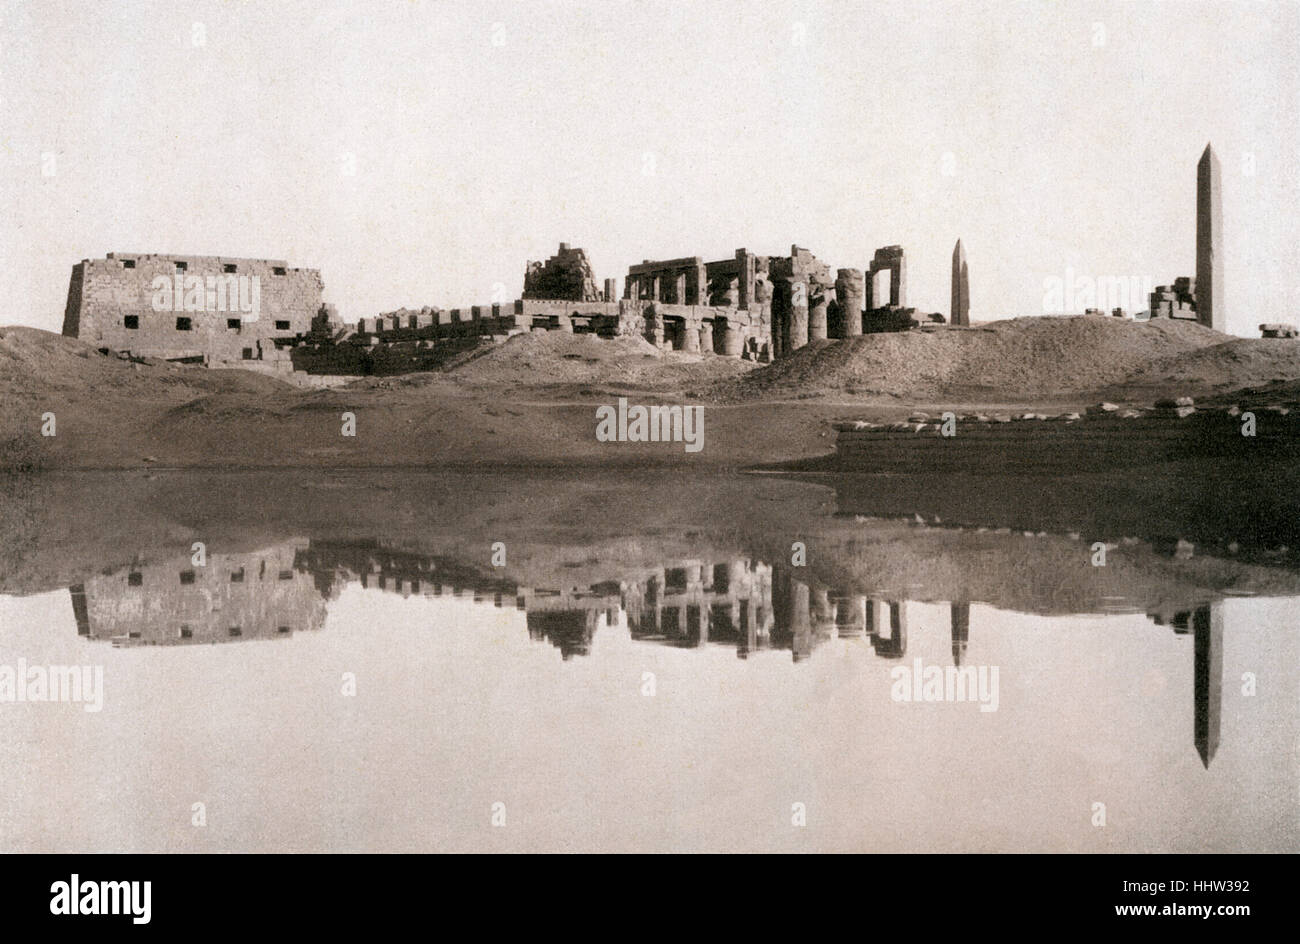 Karnak temple complex. After late 19th century phoograph. Located on the east bank of the Nile River in Thebes (modern  Luxor). Stock Photo